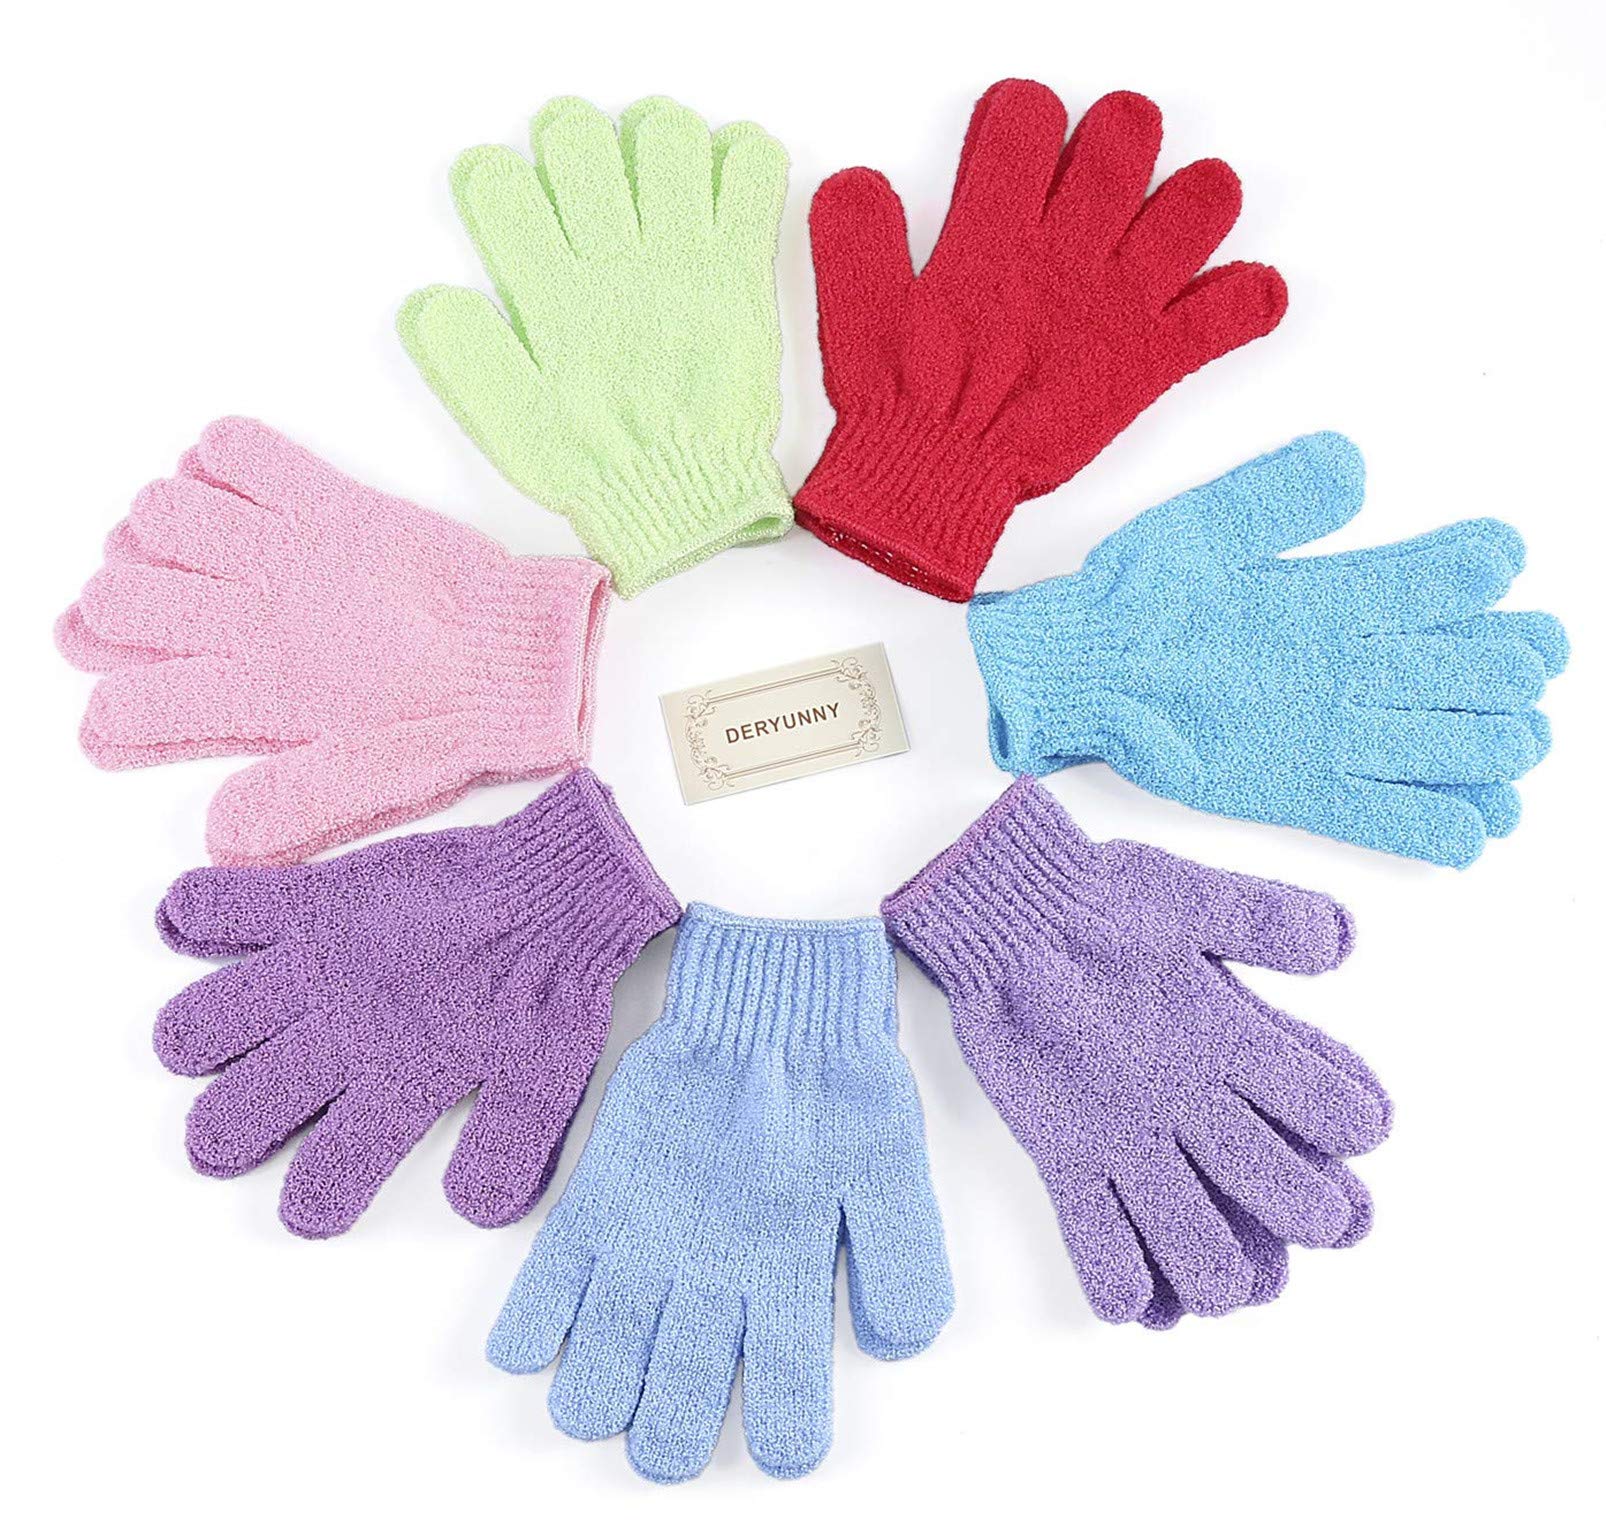 8 Pairs Double Sided Exfoliating Gloves Body Scrubber Scrubbing Glove Bath Mitts Scrubs for Shower, Body Spa Massage Dead Skin Cell Remover